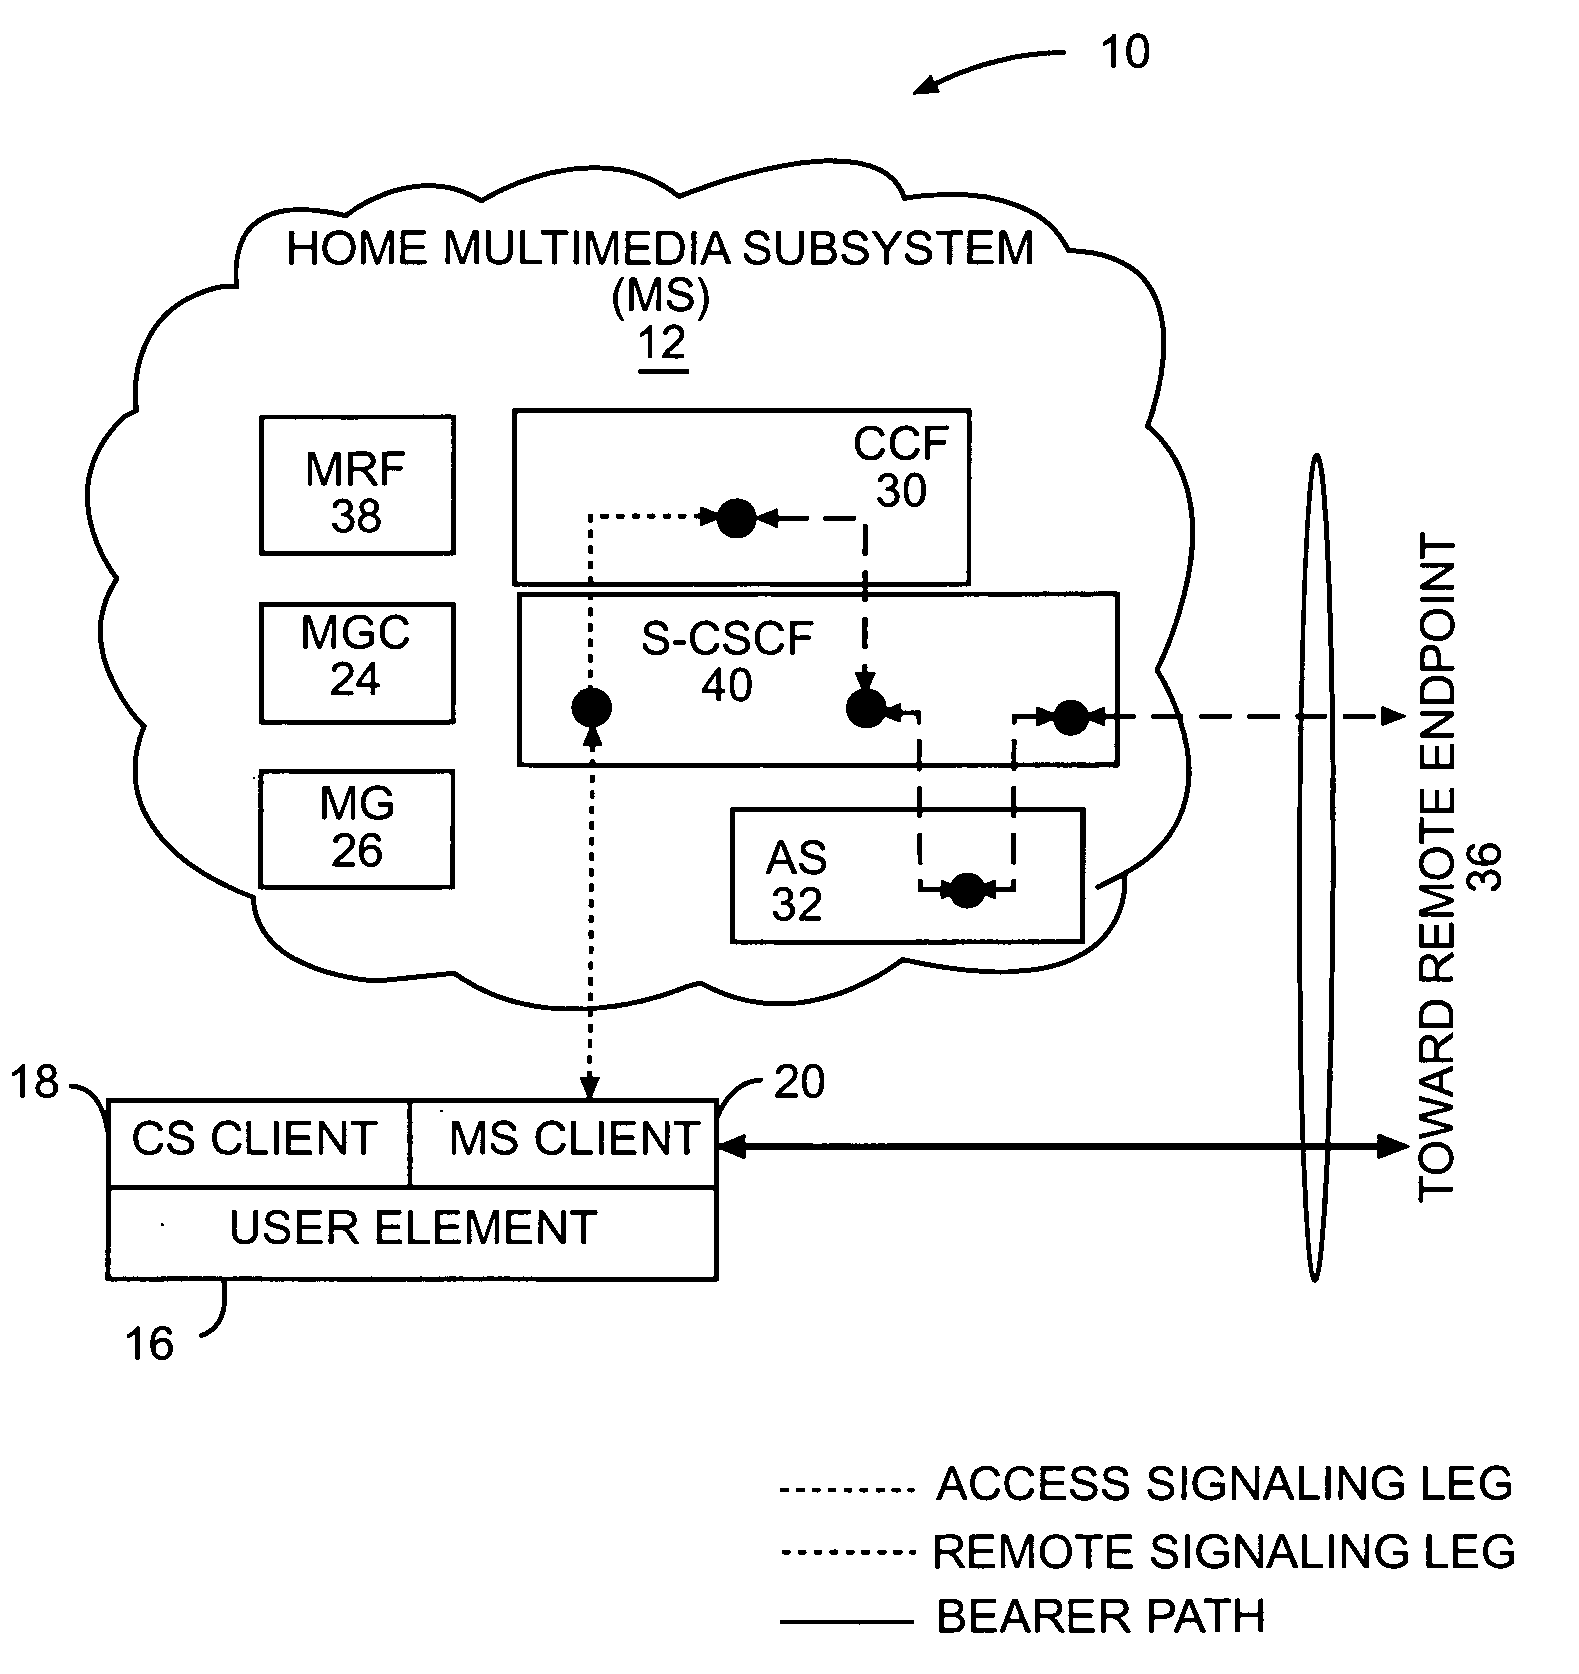 Circuit-switched and multimedia subsystem voice continuity with bearer path interruption